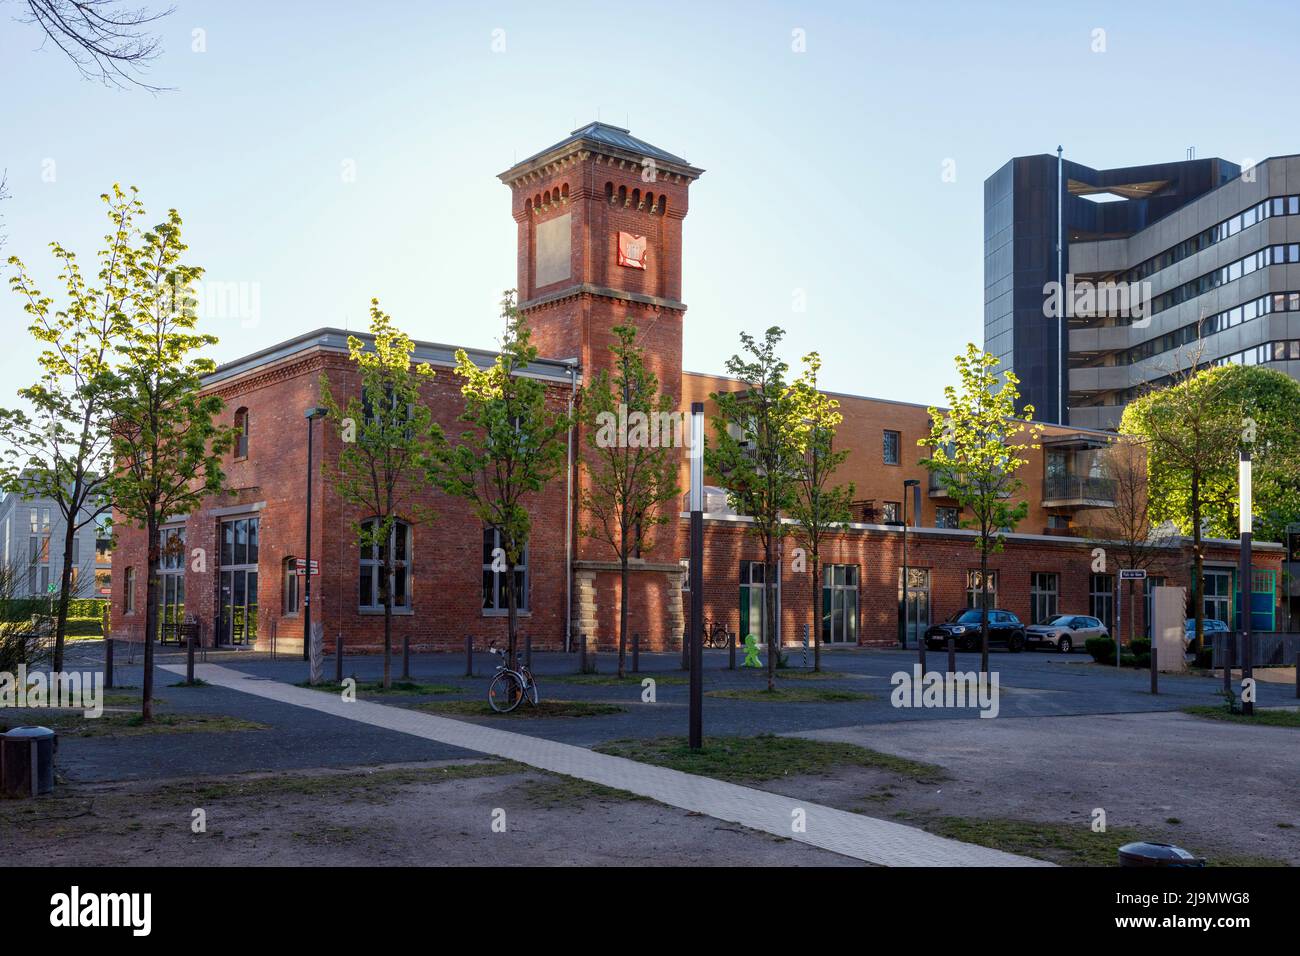 Platz der Ideen, on the site of the Ulanenkaserne, a residential and commercial district, here the AMD - Academy for Fashion and Design Stock Photo